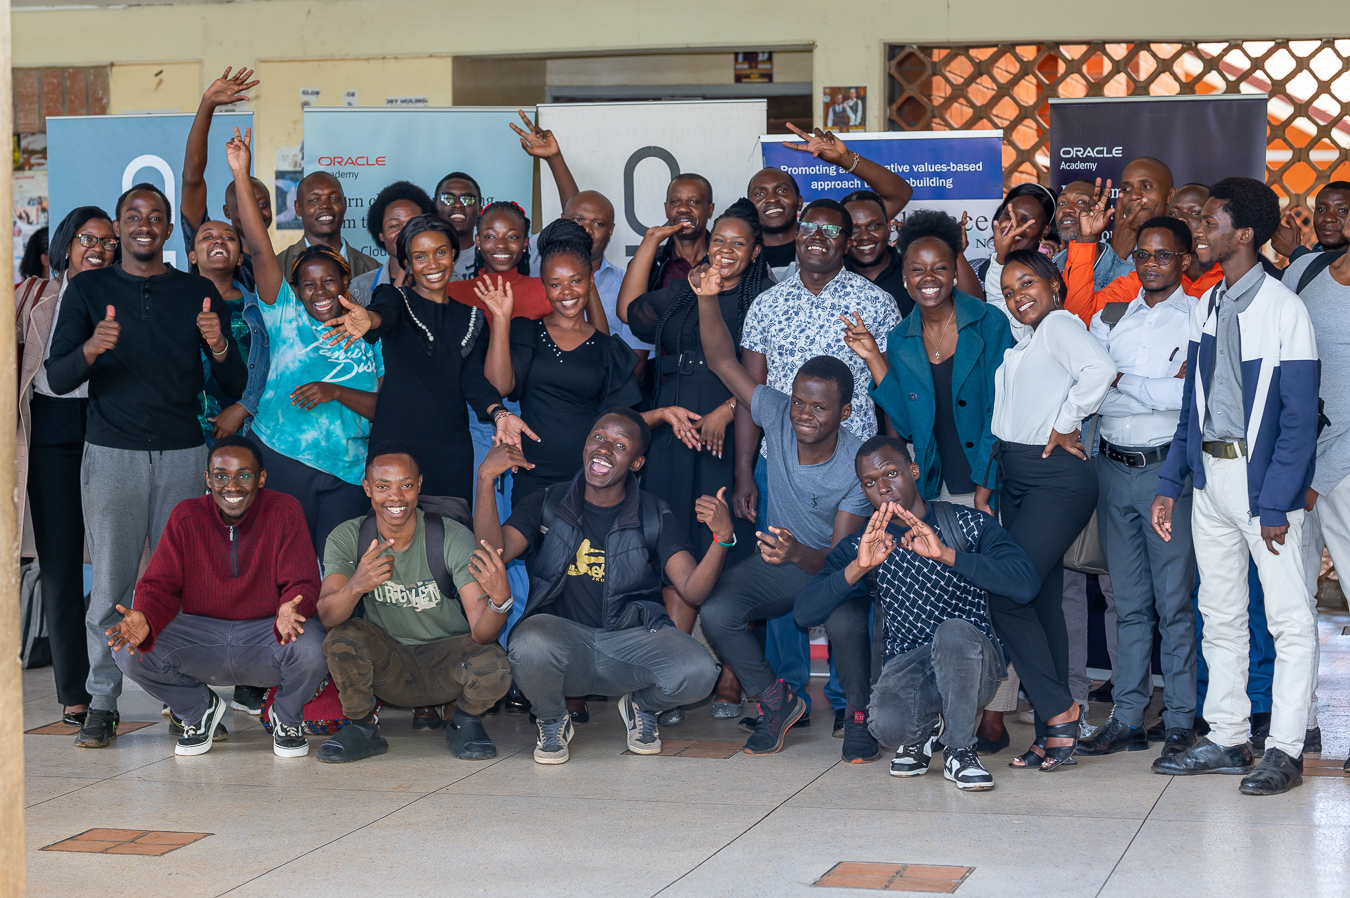 A group of people, some sitting and some standing, are posing for a group photo, many with smiles and cheerful gestures. They are indoors with banners from the Global Peace Foundation Kenya and Oracle Academy in the background, along with a tiled floor.